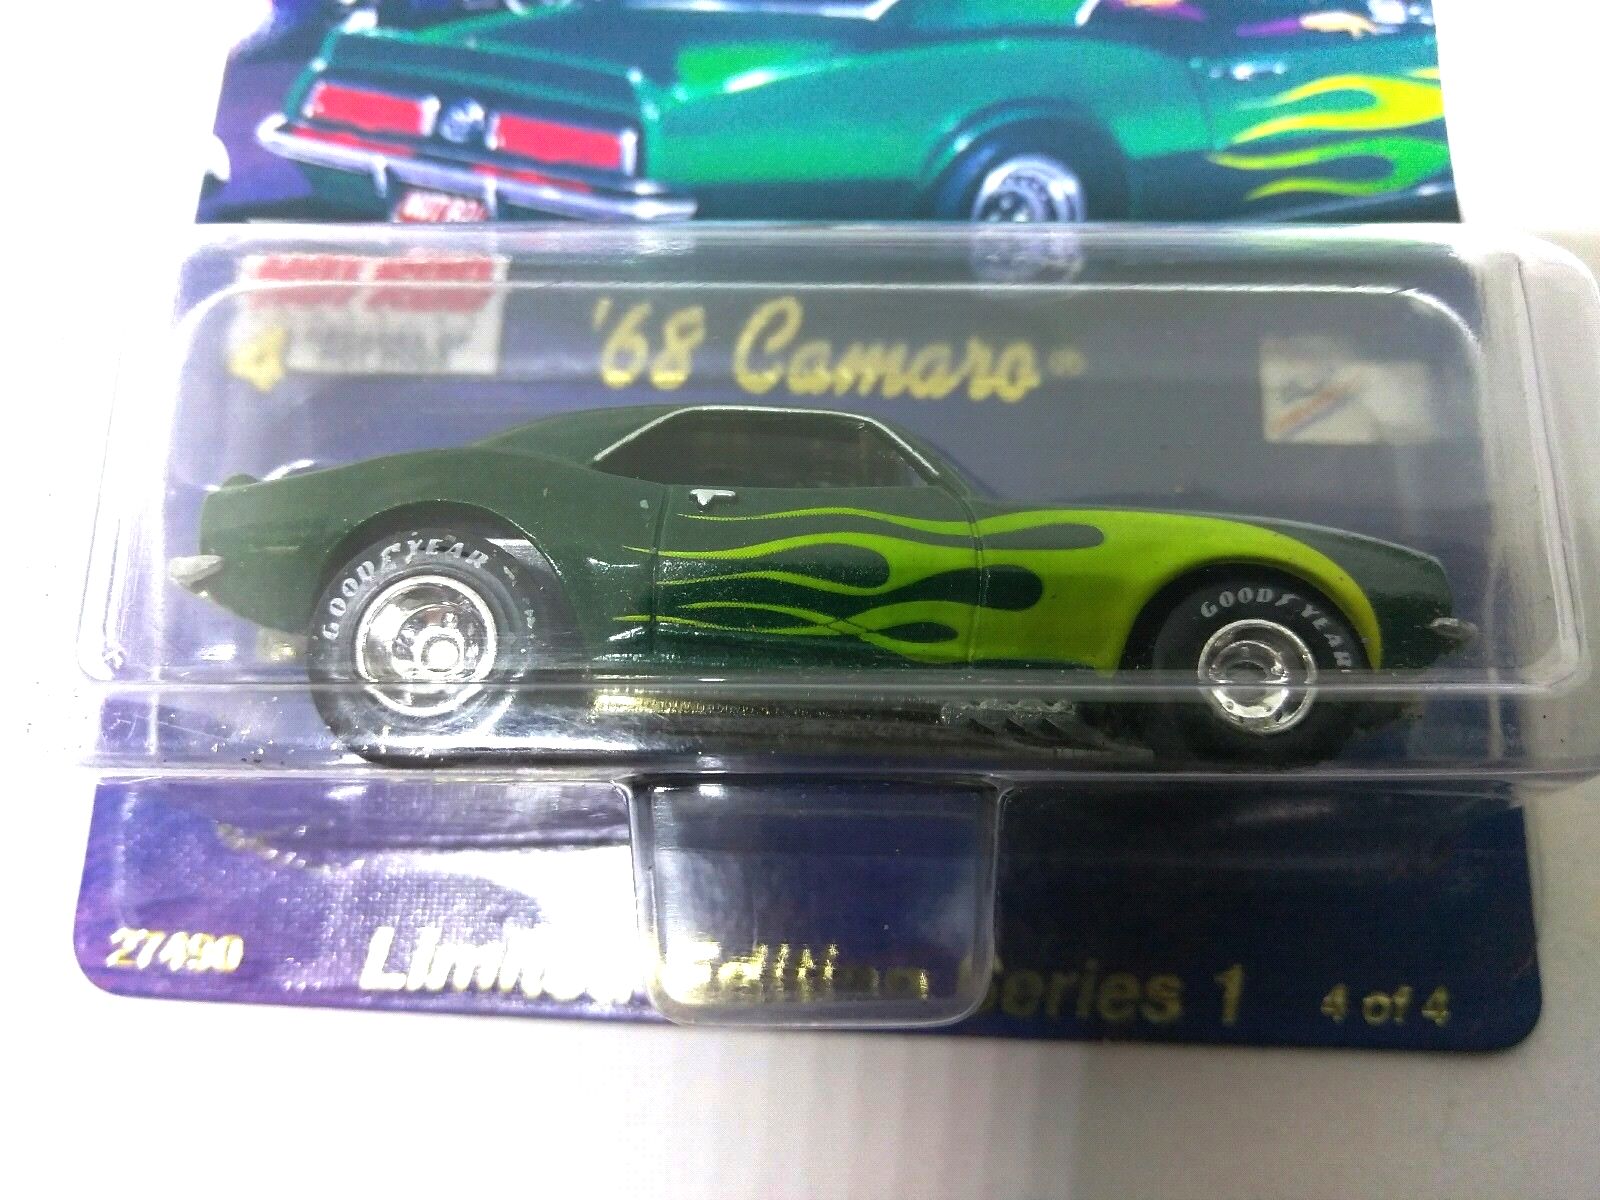 Details about   Hot Wheels 1990 ConVertAbles Hot Rods DOUBLE DUTY Camaro #3945 New in Box Sealed 